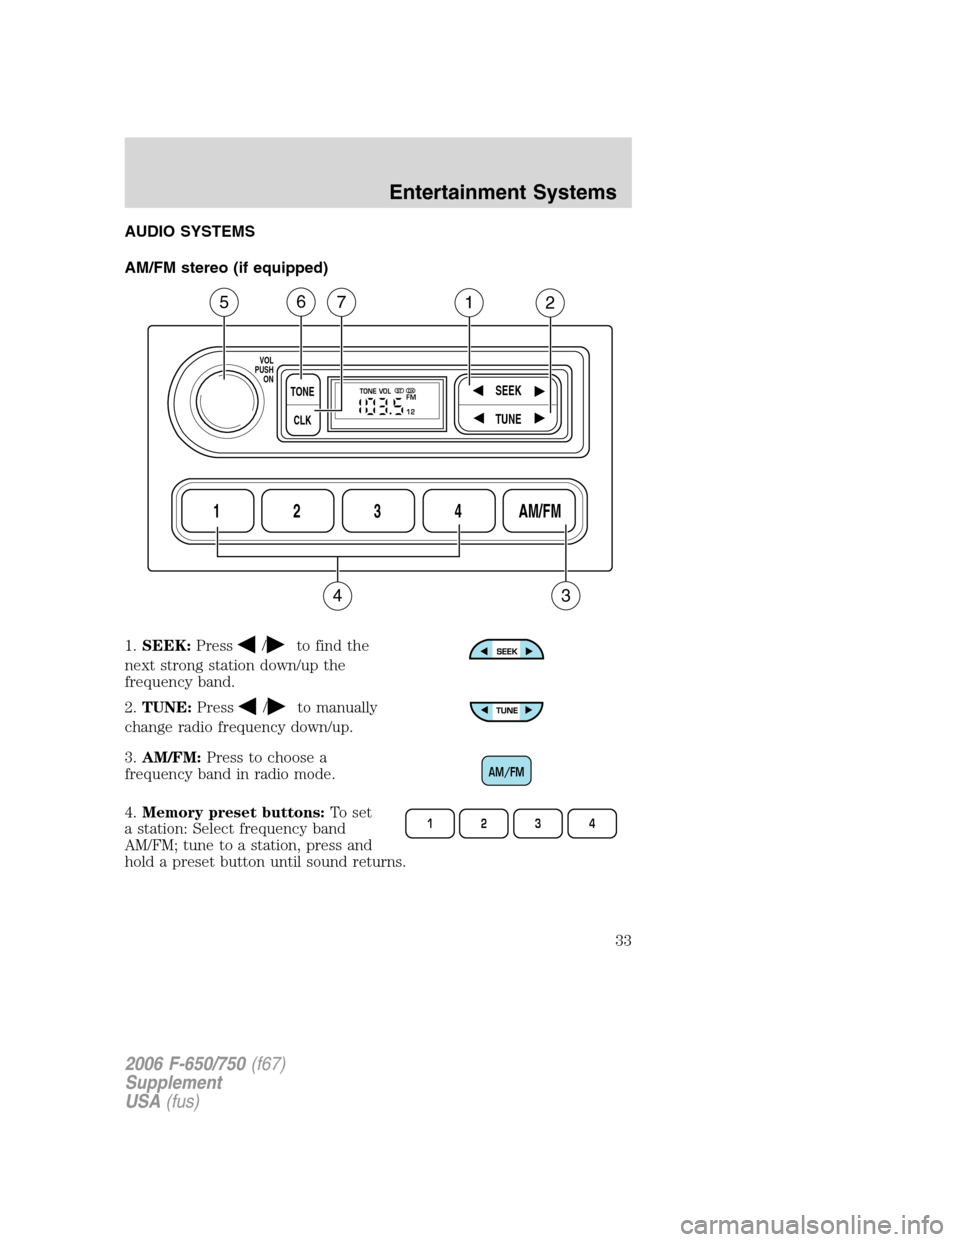 FORD F650 2006 11.G Owners Guide AUDIO SYSTEMS
AM/FM stereo (if equipped)
1.SEEK:Press
/to find the
next strong station down/up the
frequency band.
2.TUNE:Press
/to manually
change radio frequency down/up.
3.AM/FM:Press to choose a
f